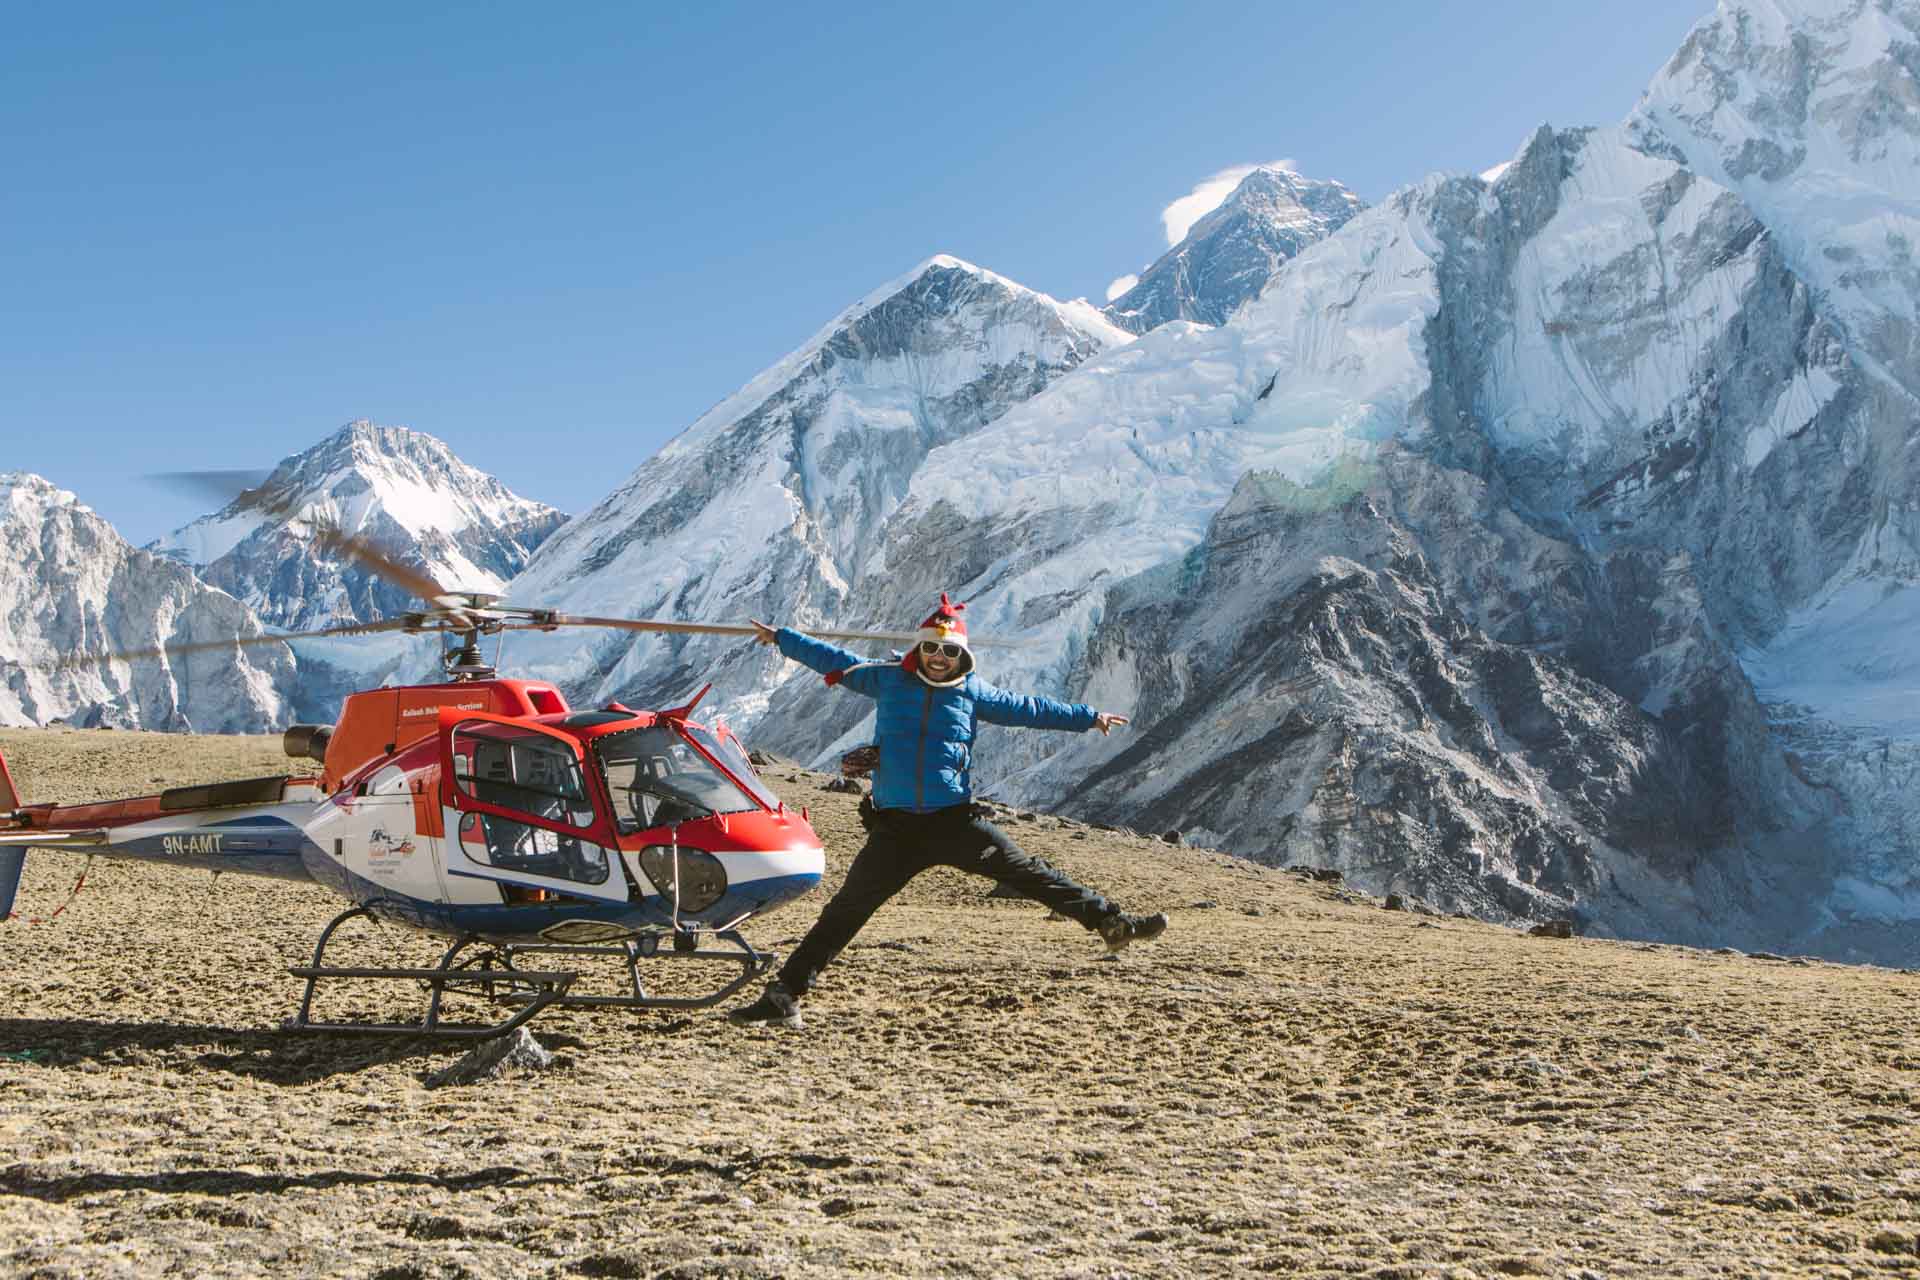 Helicopter Tour to Everest Base Camp and Kala Patthar - 2 days | HoneyGuide